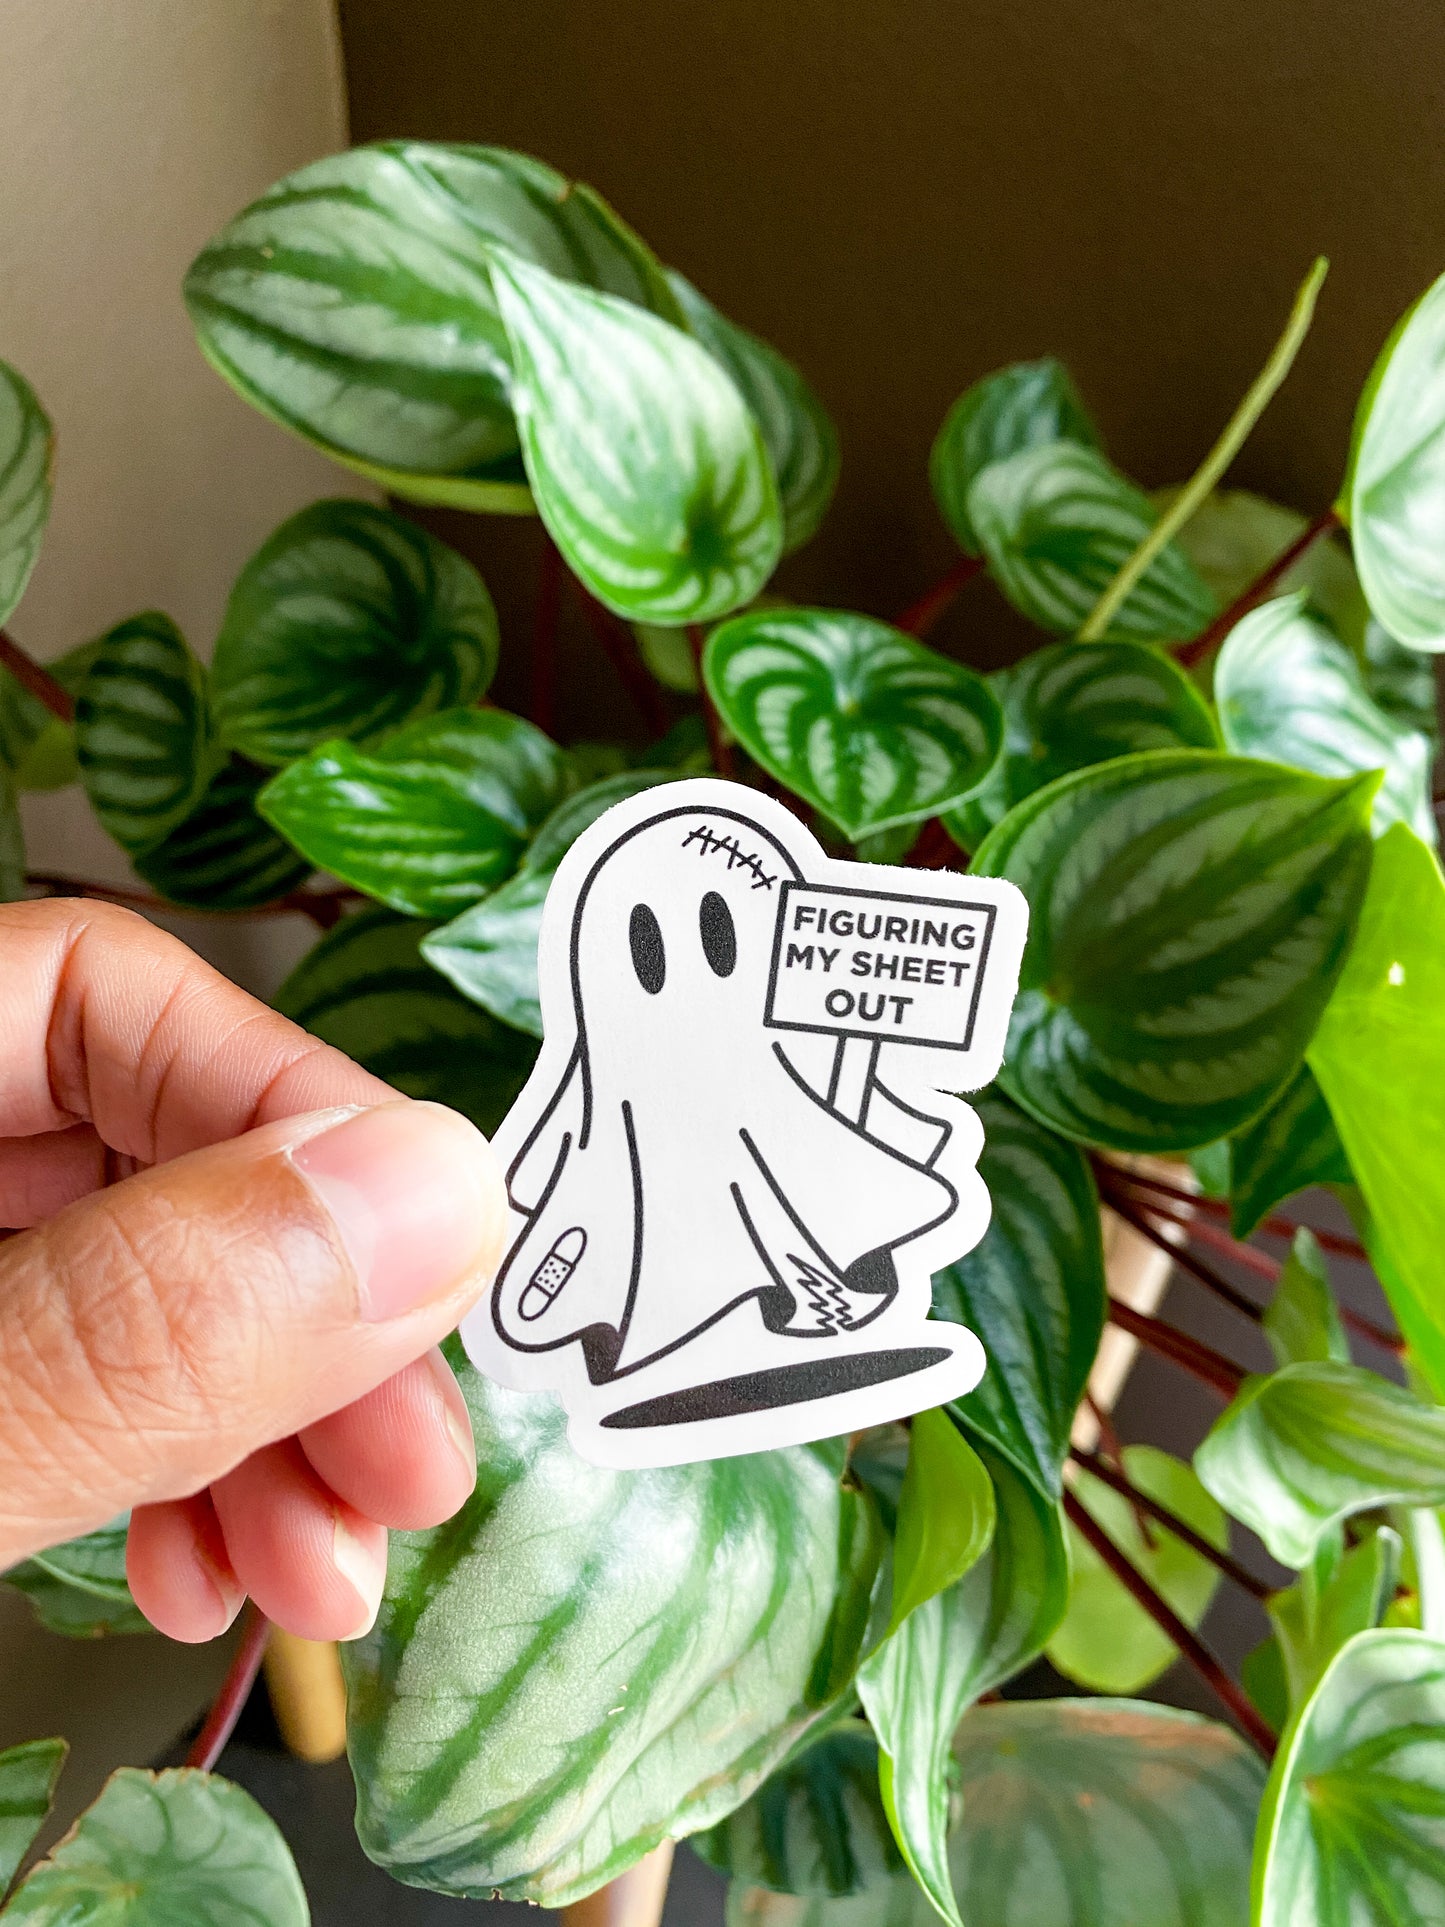 Single spooky ghost holding sign that reads "figuring my sheet out"